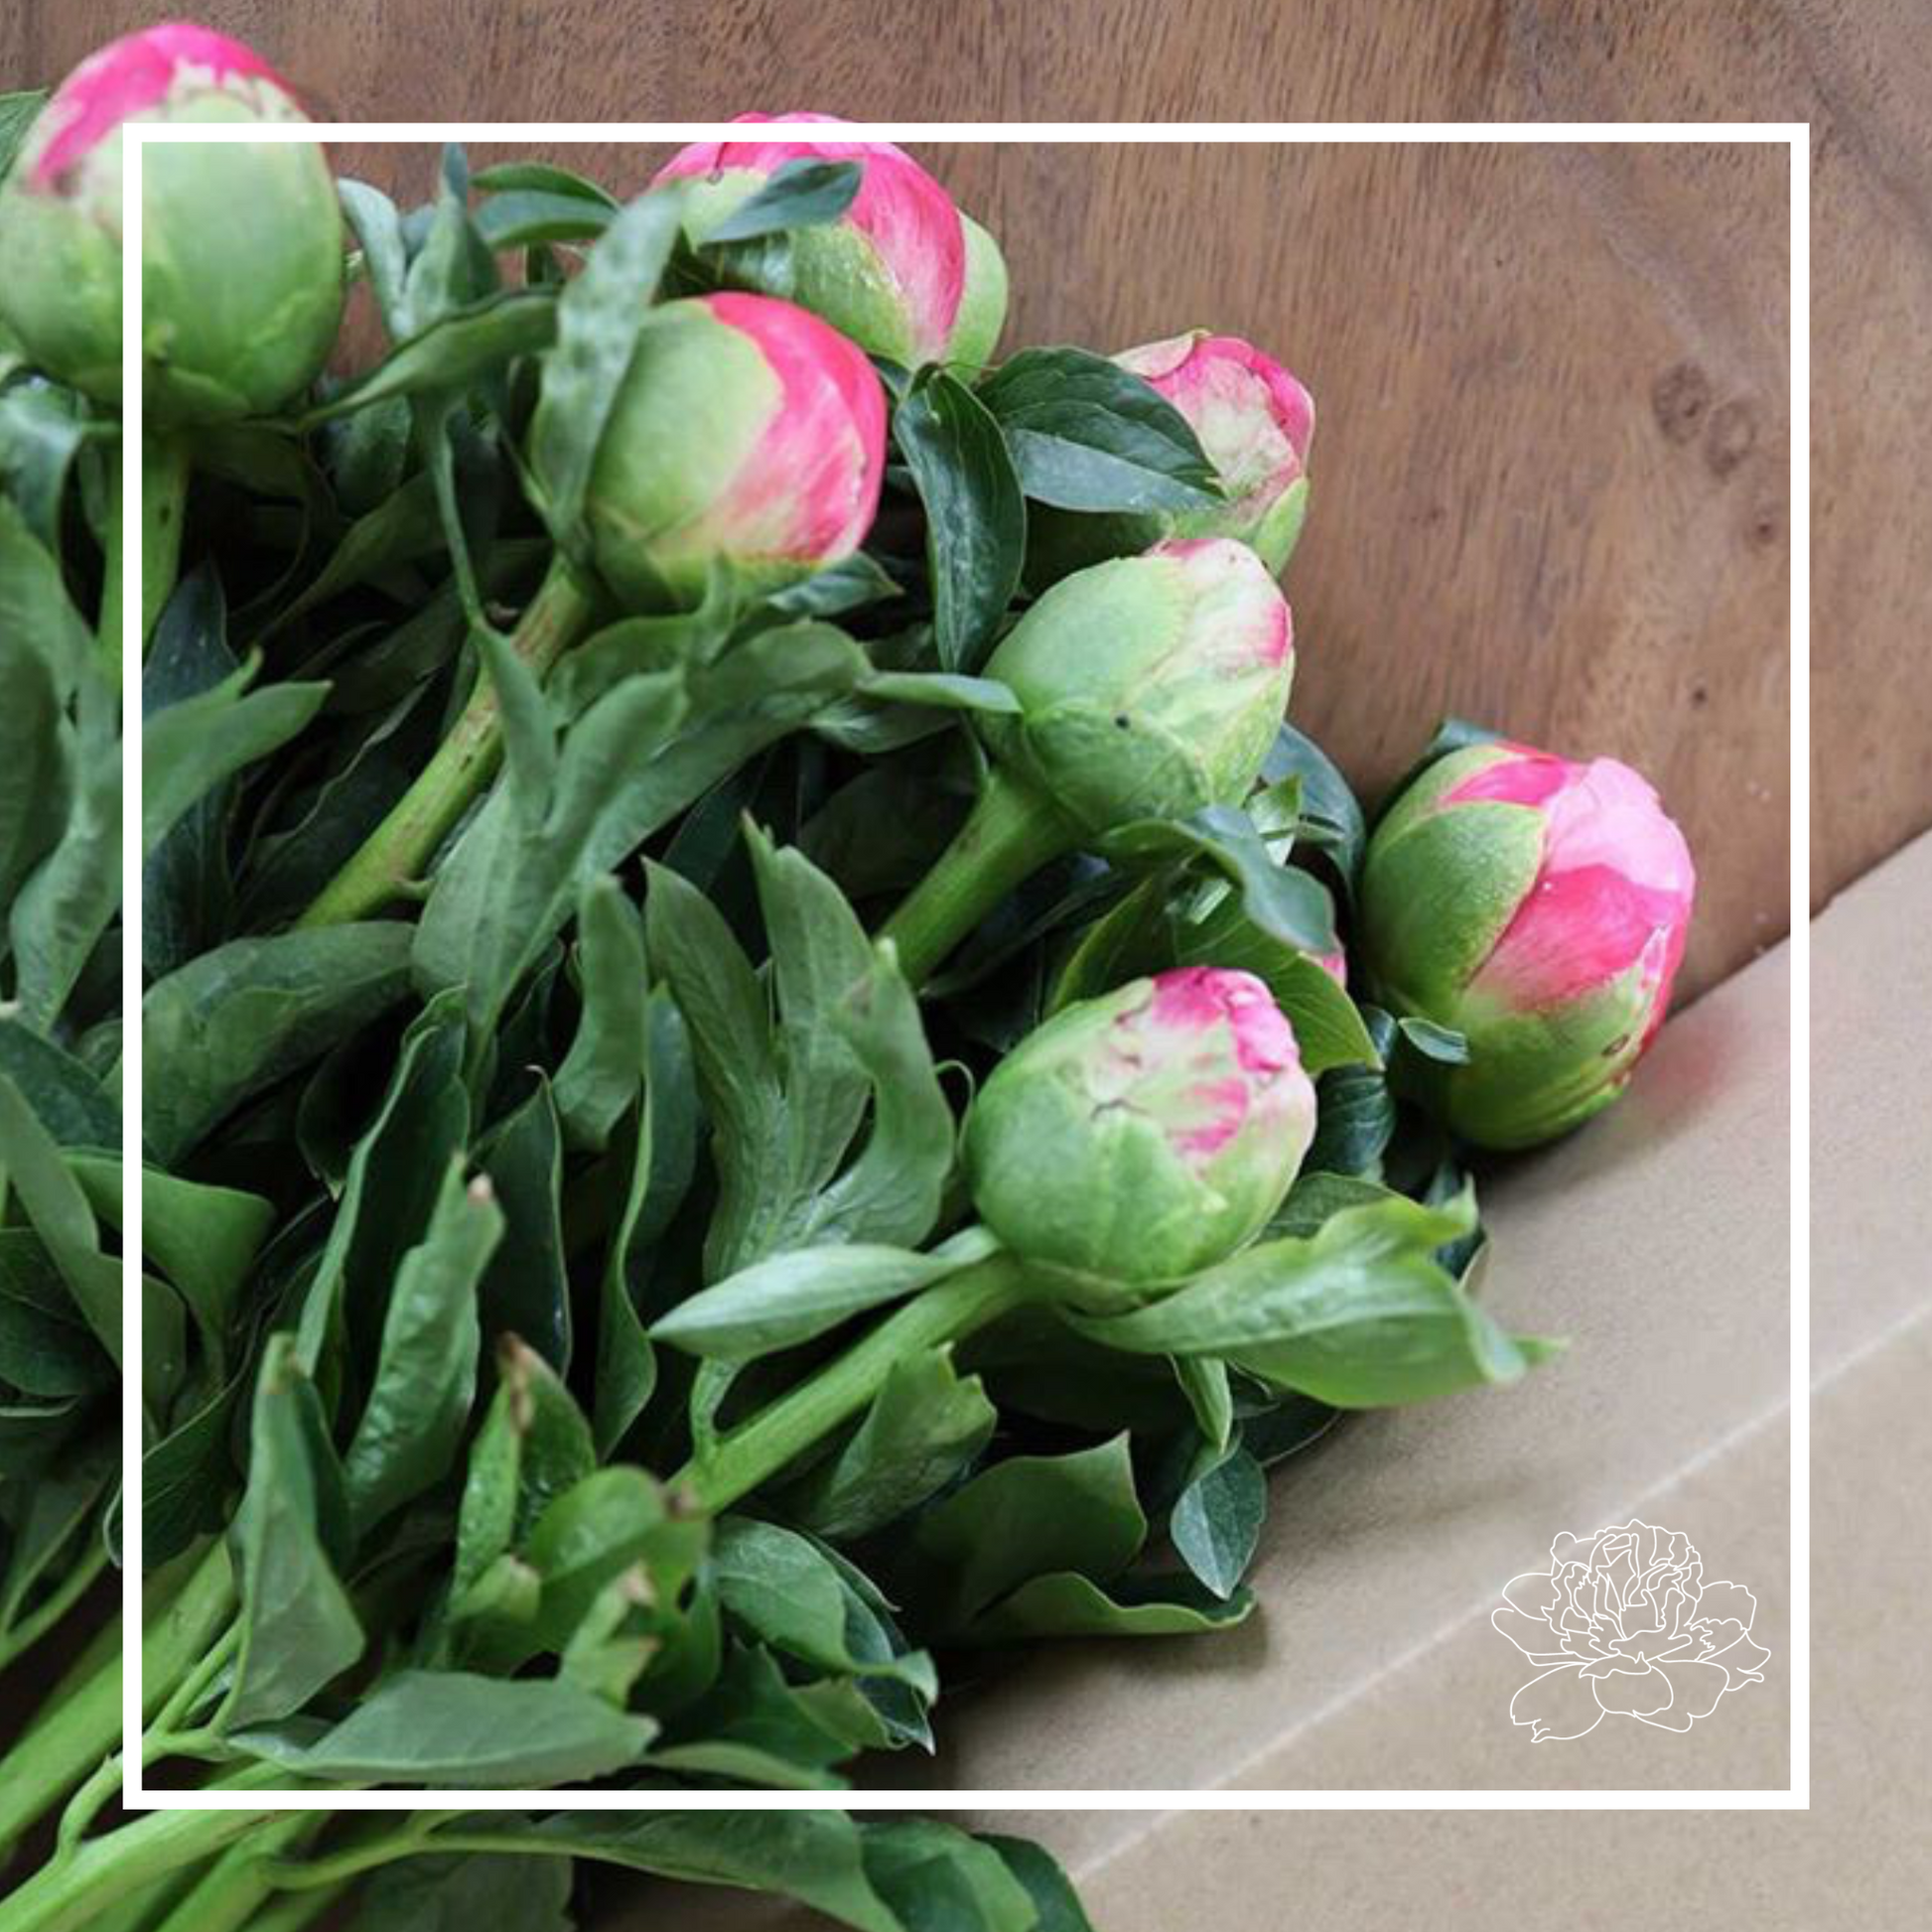 seven peony buds with a brown background . green foliage covers half the image. With a white box graphic framed around the image and the prebbleton peonies logo in the bottom right corner. 